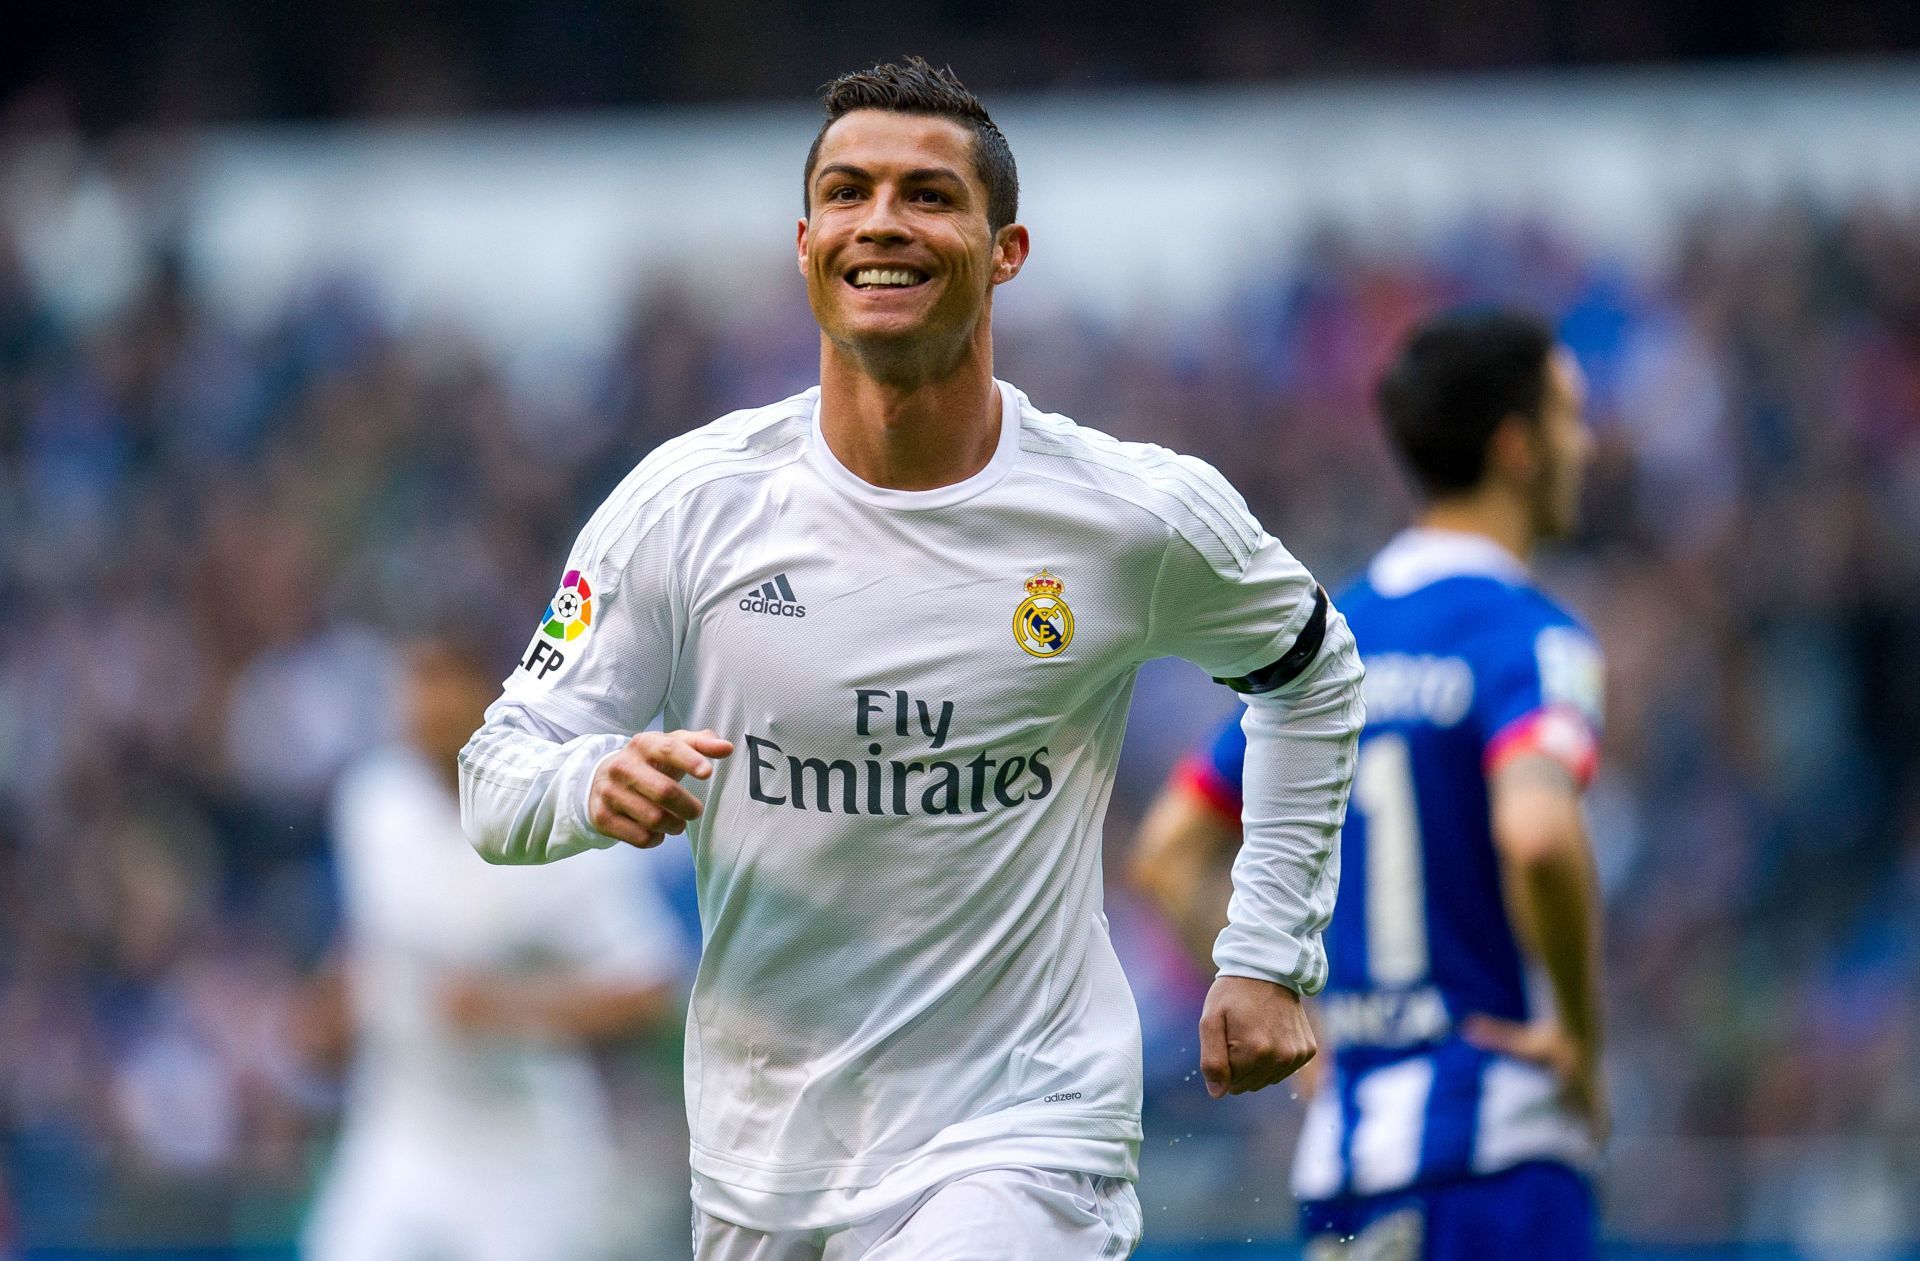 Cristiano Ronaldo bagged an impressive 48 goals for Real Madrid in the 2014-15 season